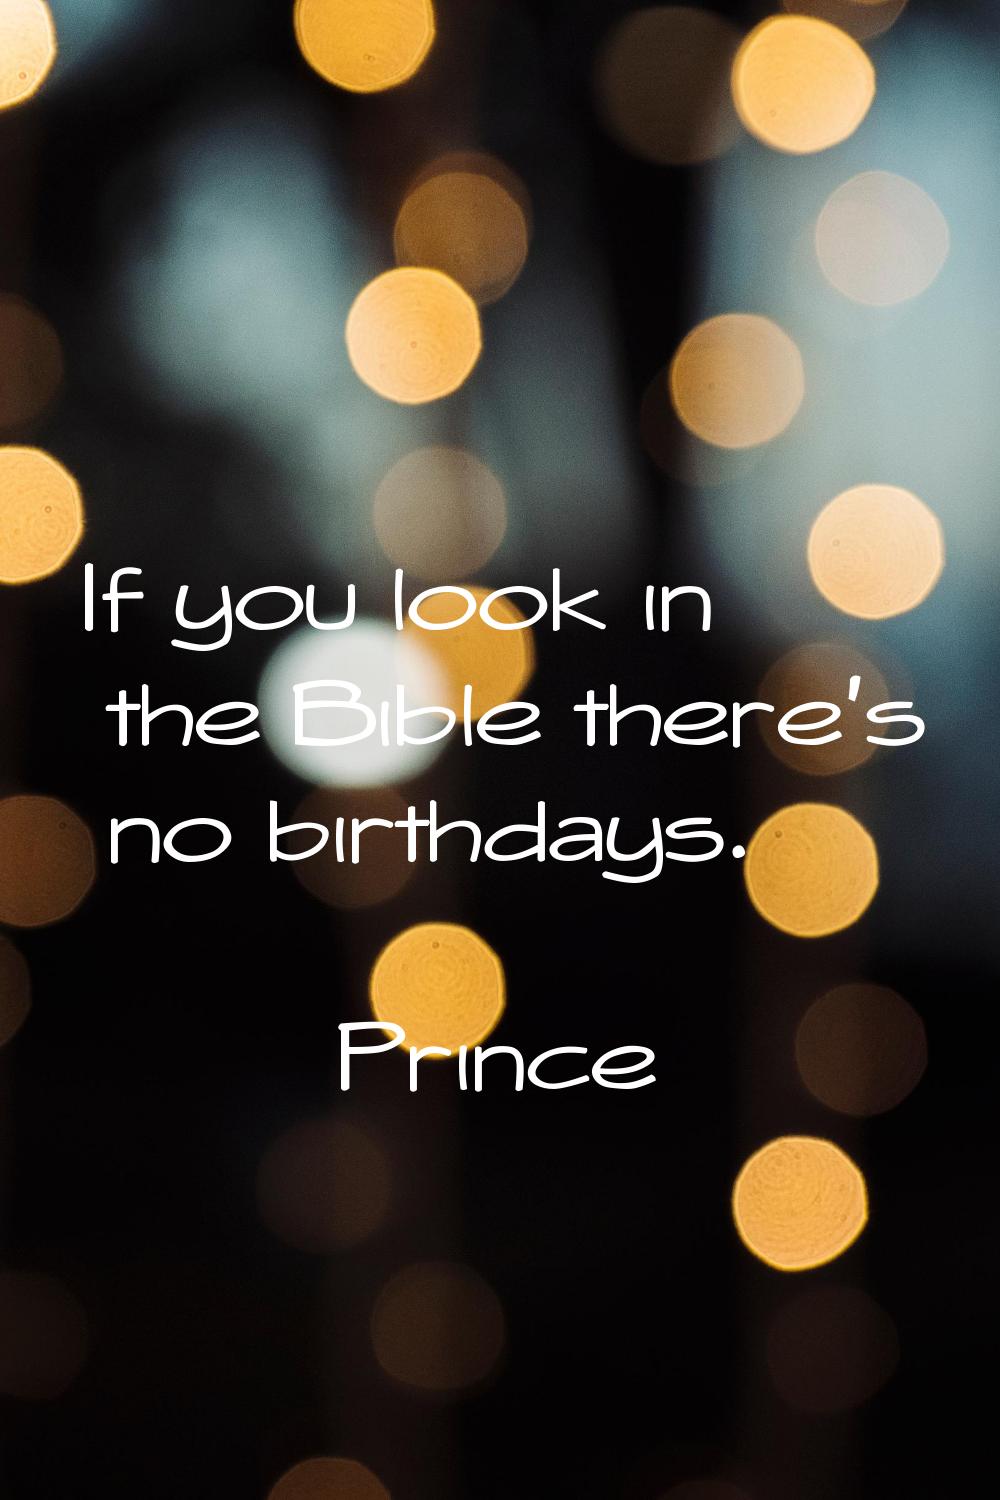 If you look in the Bible there's no birthdays.